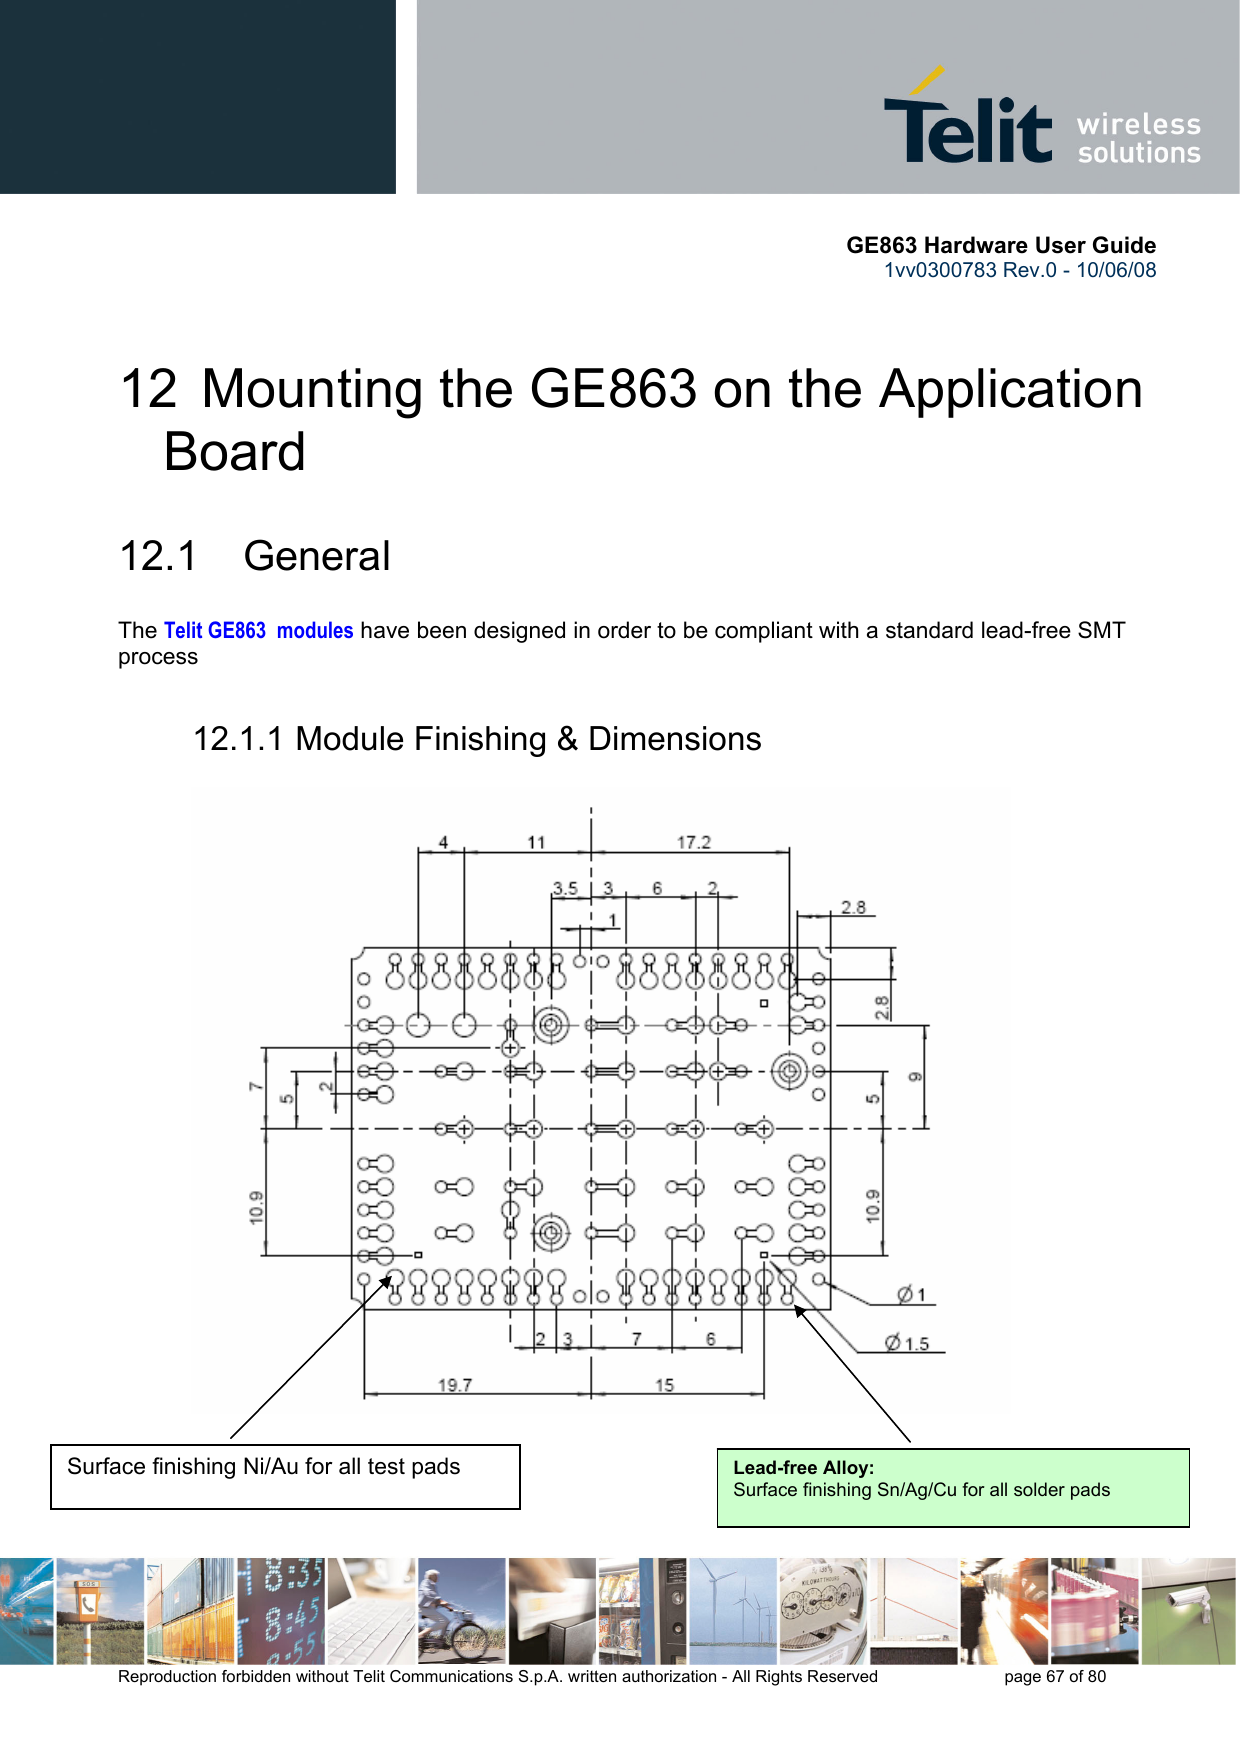       GE863 Hardware User Guide 1vv0300783 Rev.0 - 10/06/08 Reproduction forbidden without Telit Communications S.p.A. written authorization - All Rights Reserved    page 67 of 80  12  Mounting the GE863 on the Application Board 12.1 General The Telit GE863  modules have been designed in order to be compliant with a standard lead-free SMT process 12.1.1 Module Finishing &amp; Dimensions                              Surface finishing Ni/Au for all test pads  Lead-free Alloy:Surface finishing Sn/Ag/Cu for all solder pads 